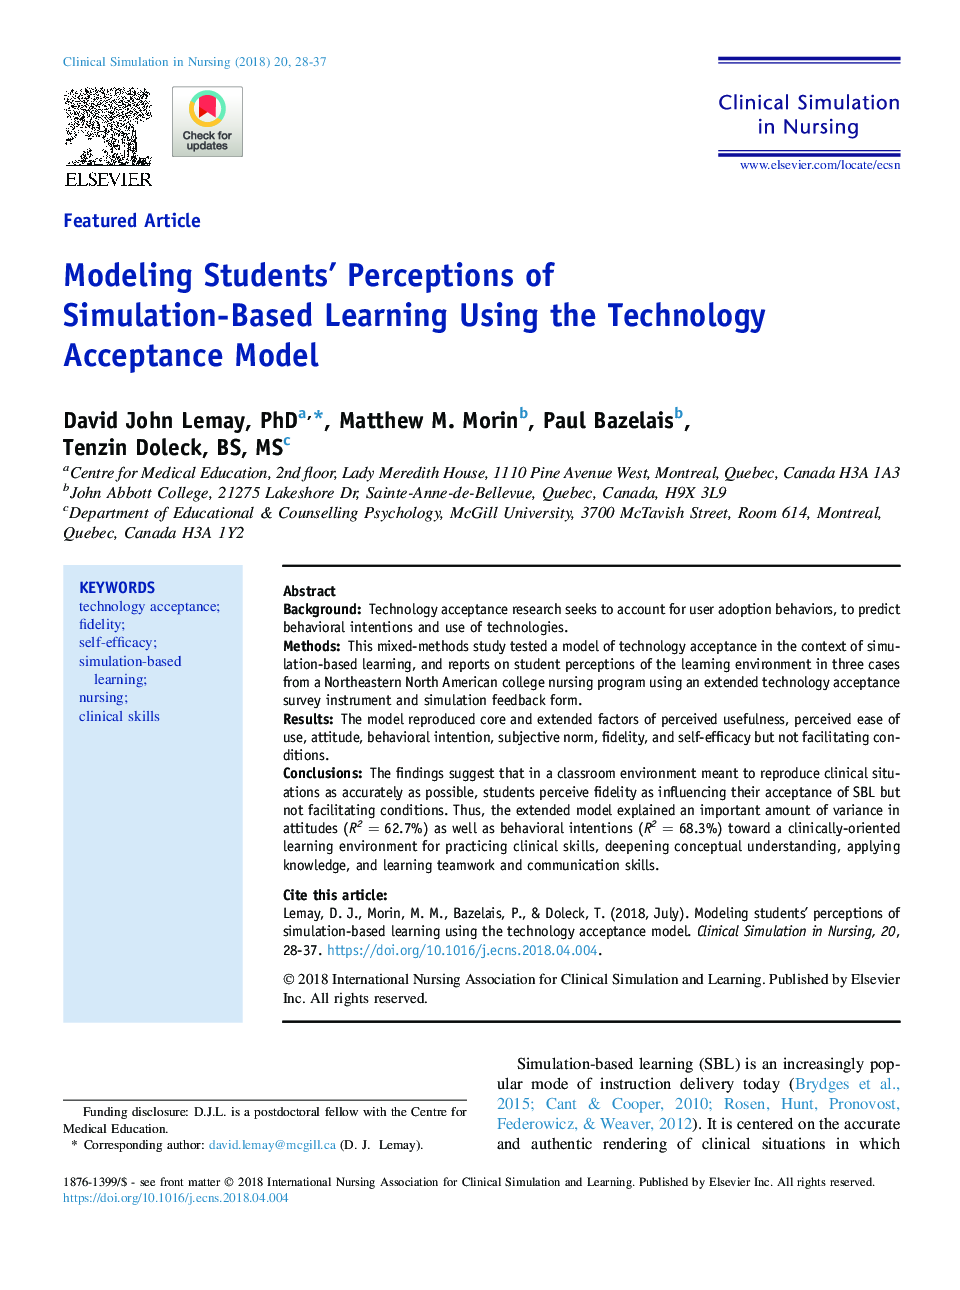 Modeling Students' Perceptions of Simulation-Based Learning Using the Technology Acceptance Model